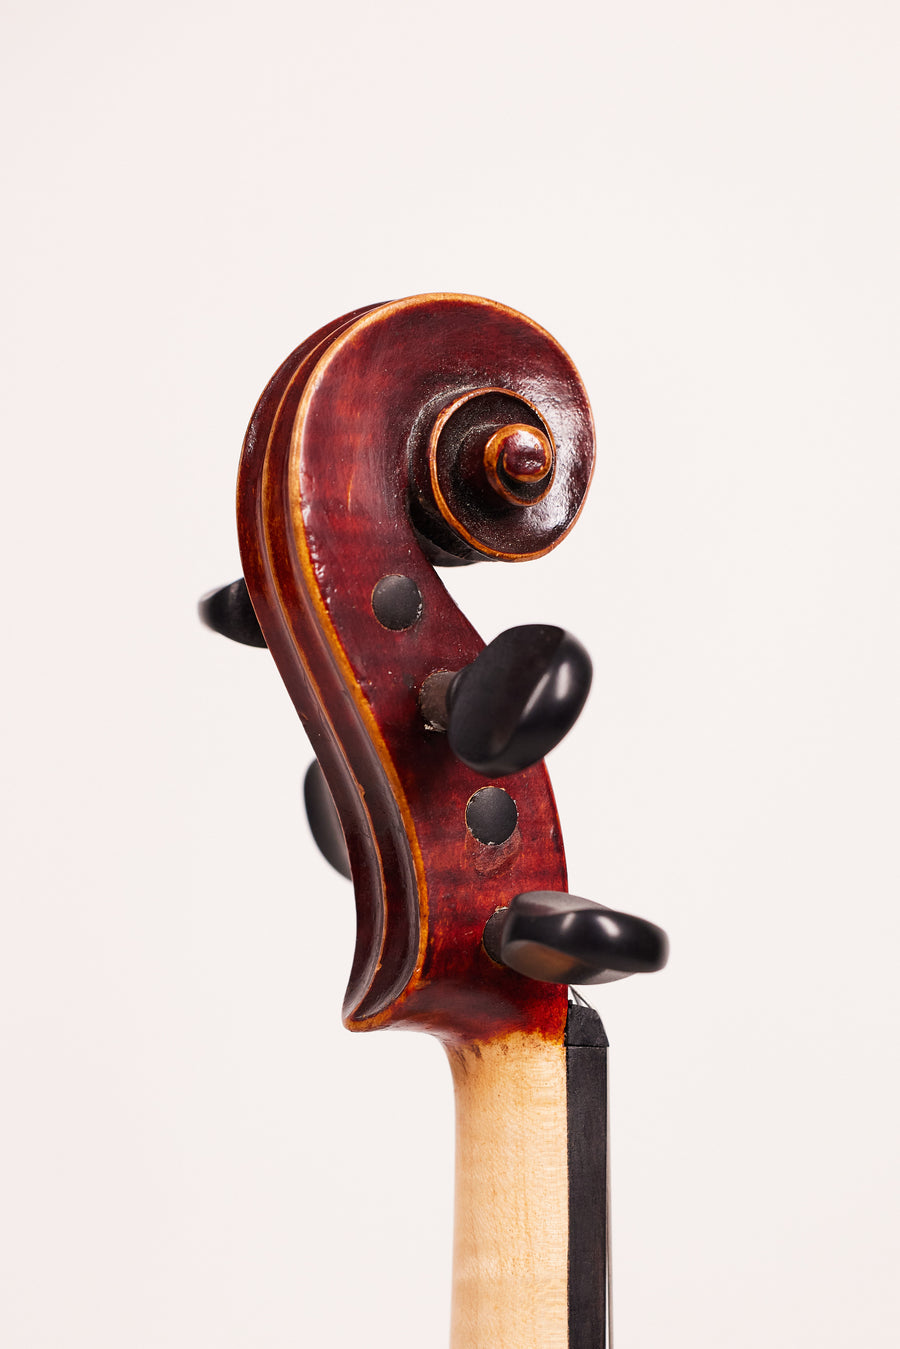 An Early 19th C. Mittenwald Violin Attributed To Josef Sailor, 1824.